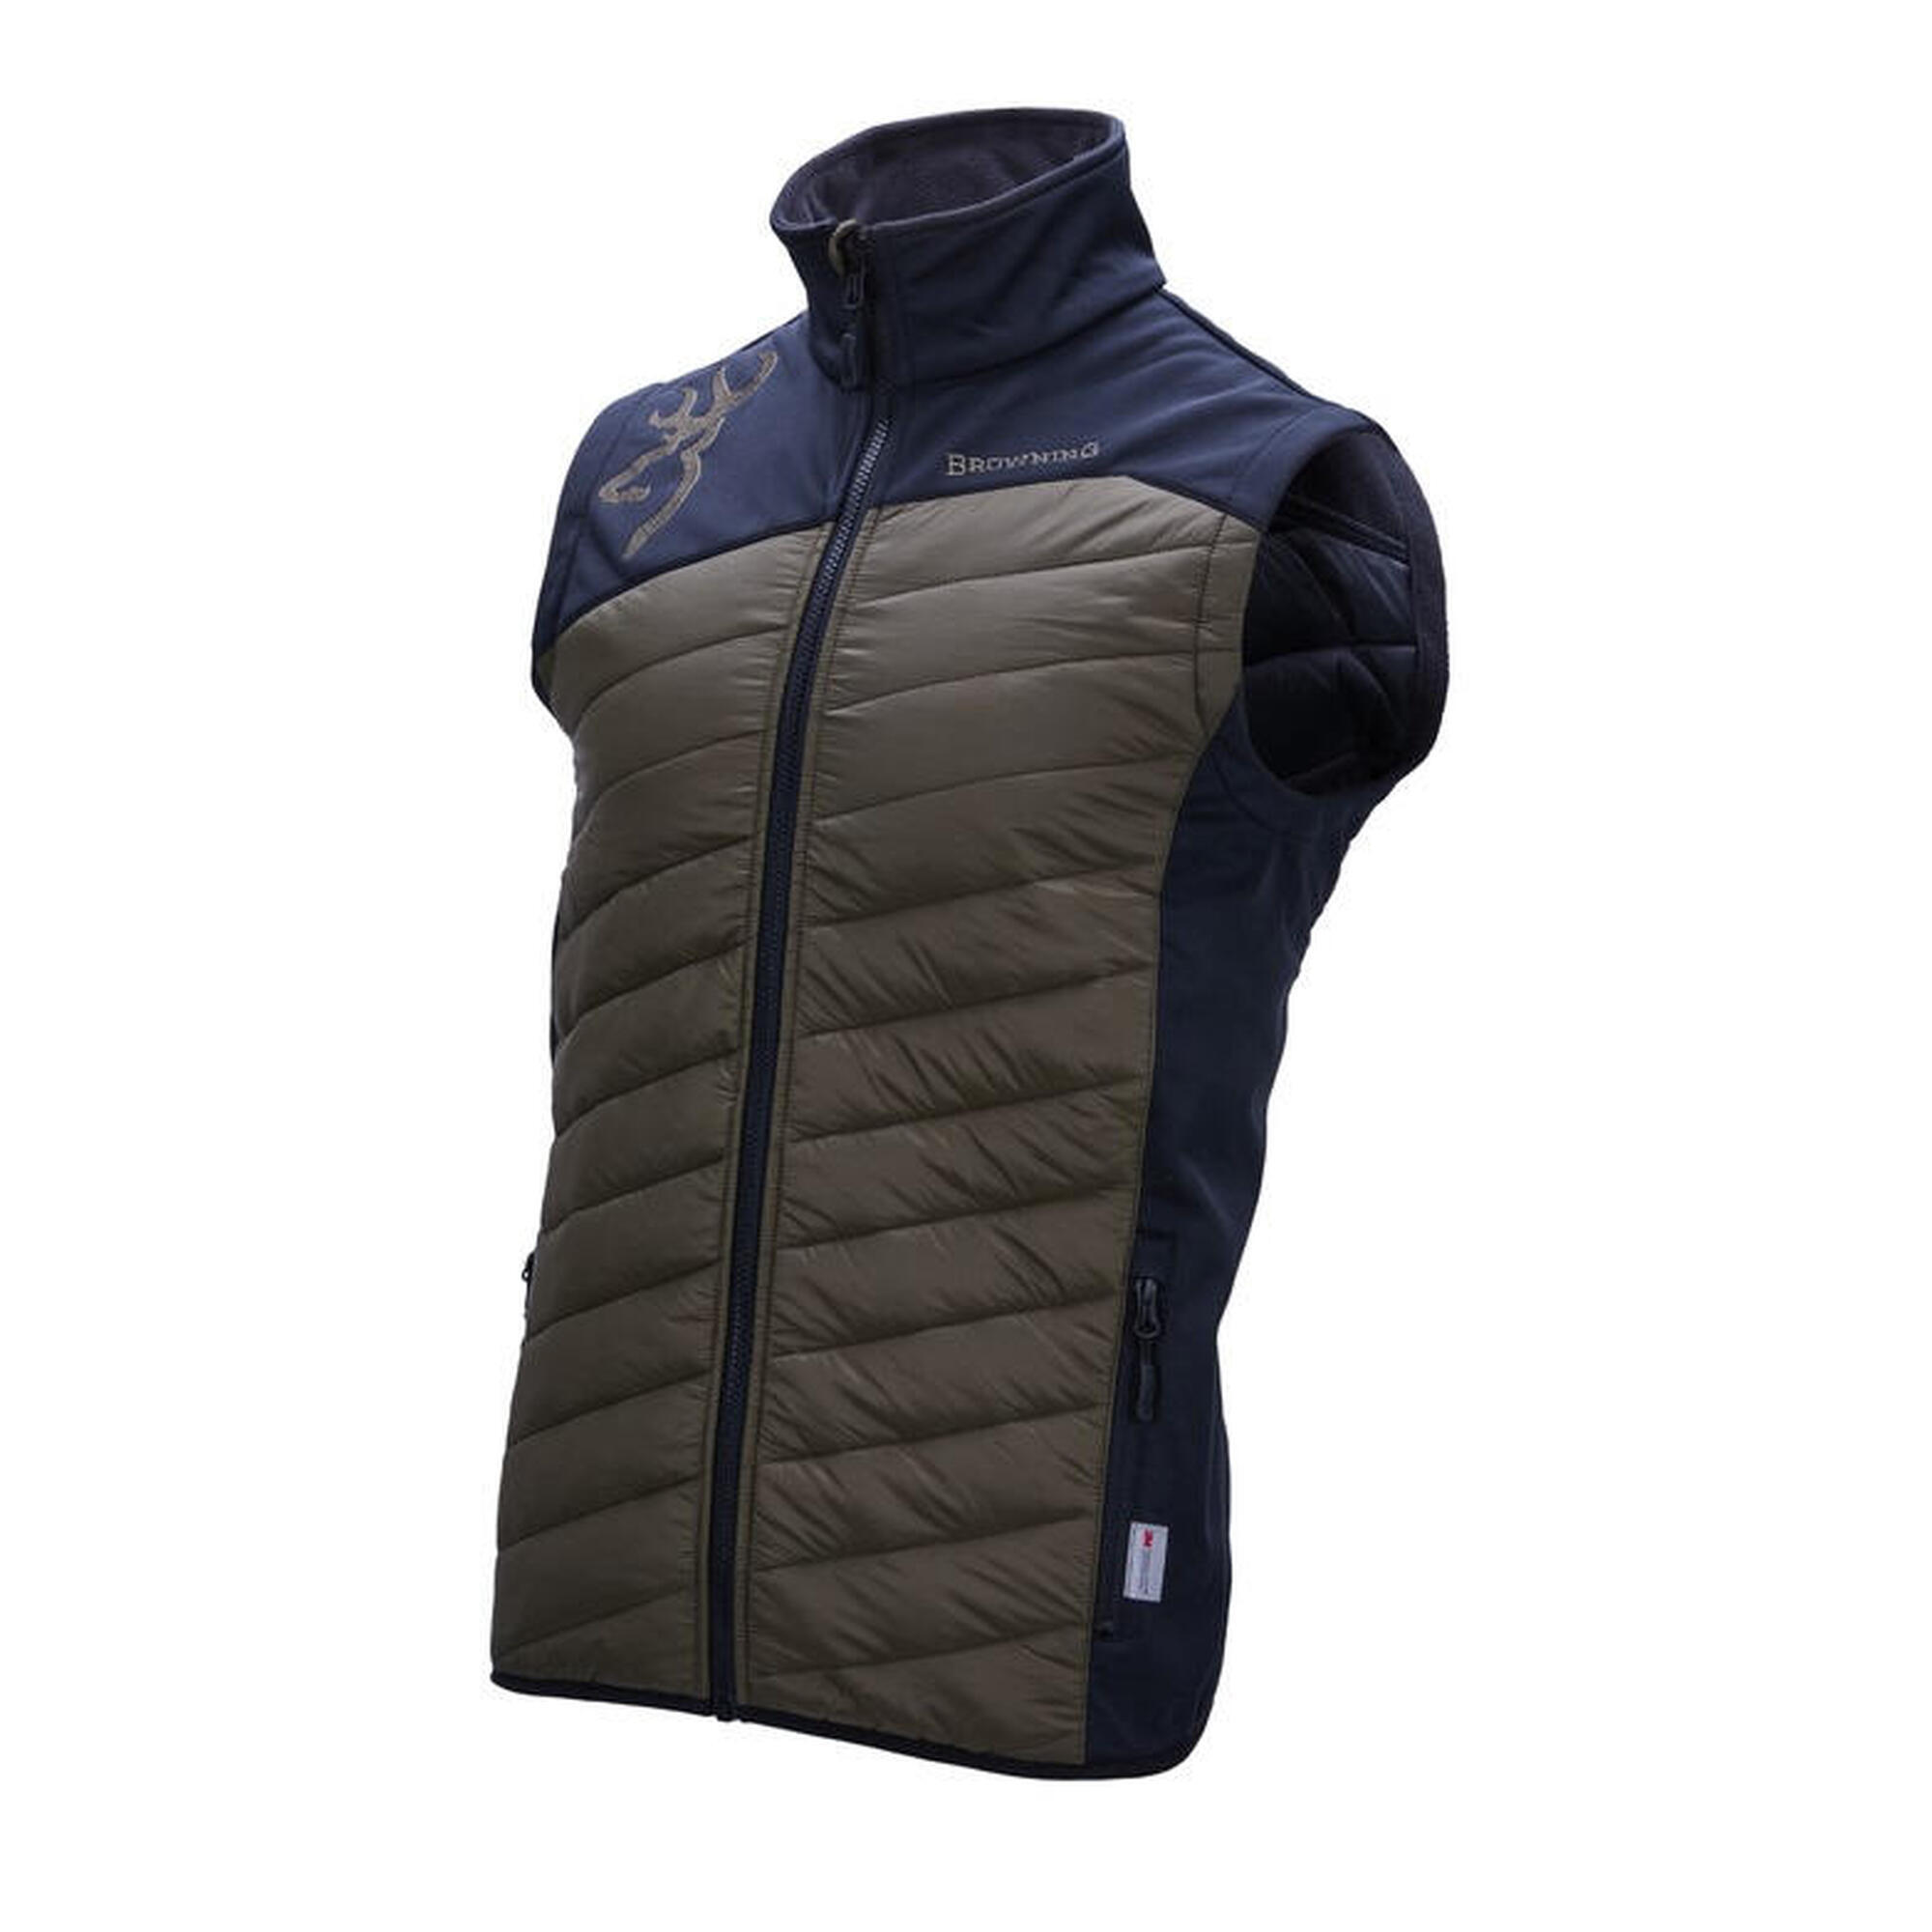 Gilet sans manches XPO Coldkill 2 Browning